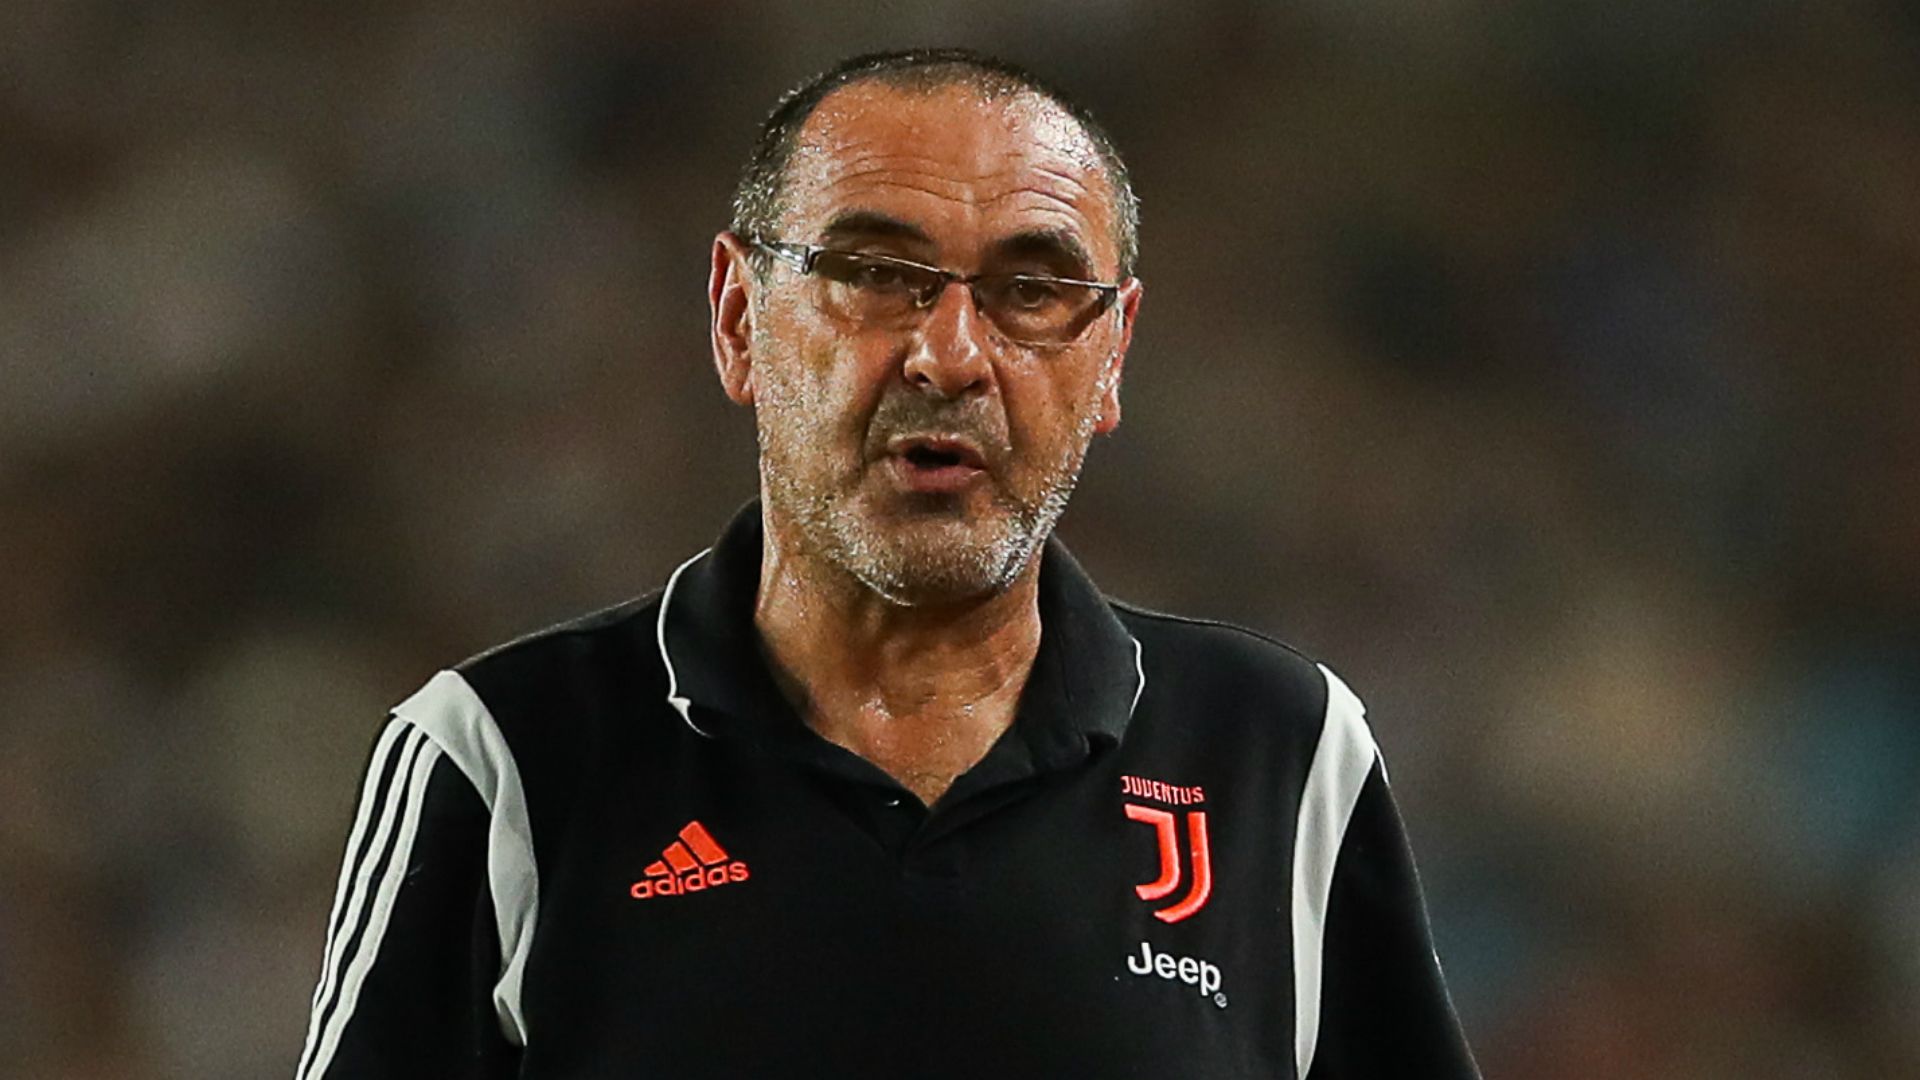 Unwell Sarri to miss opening two Serie A games